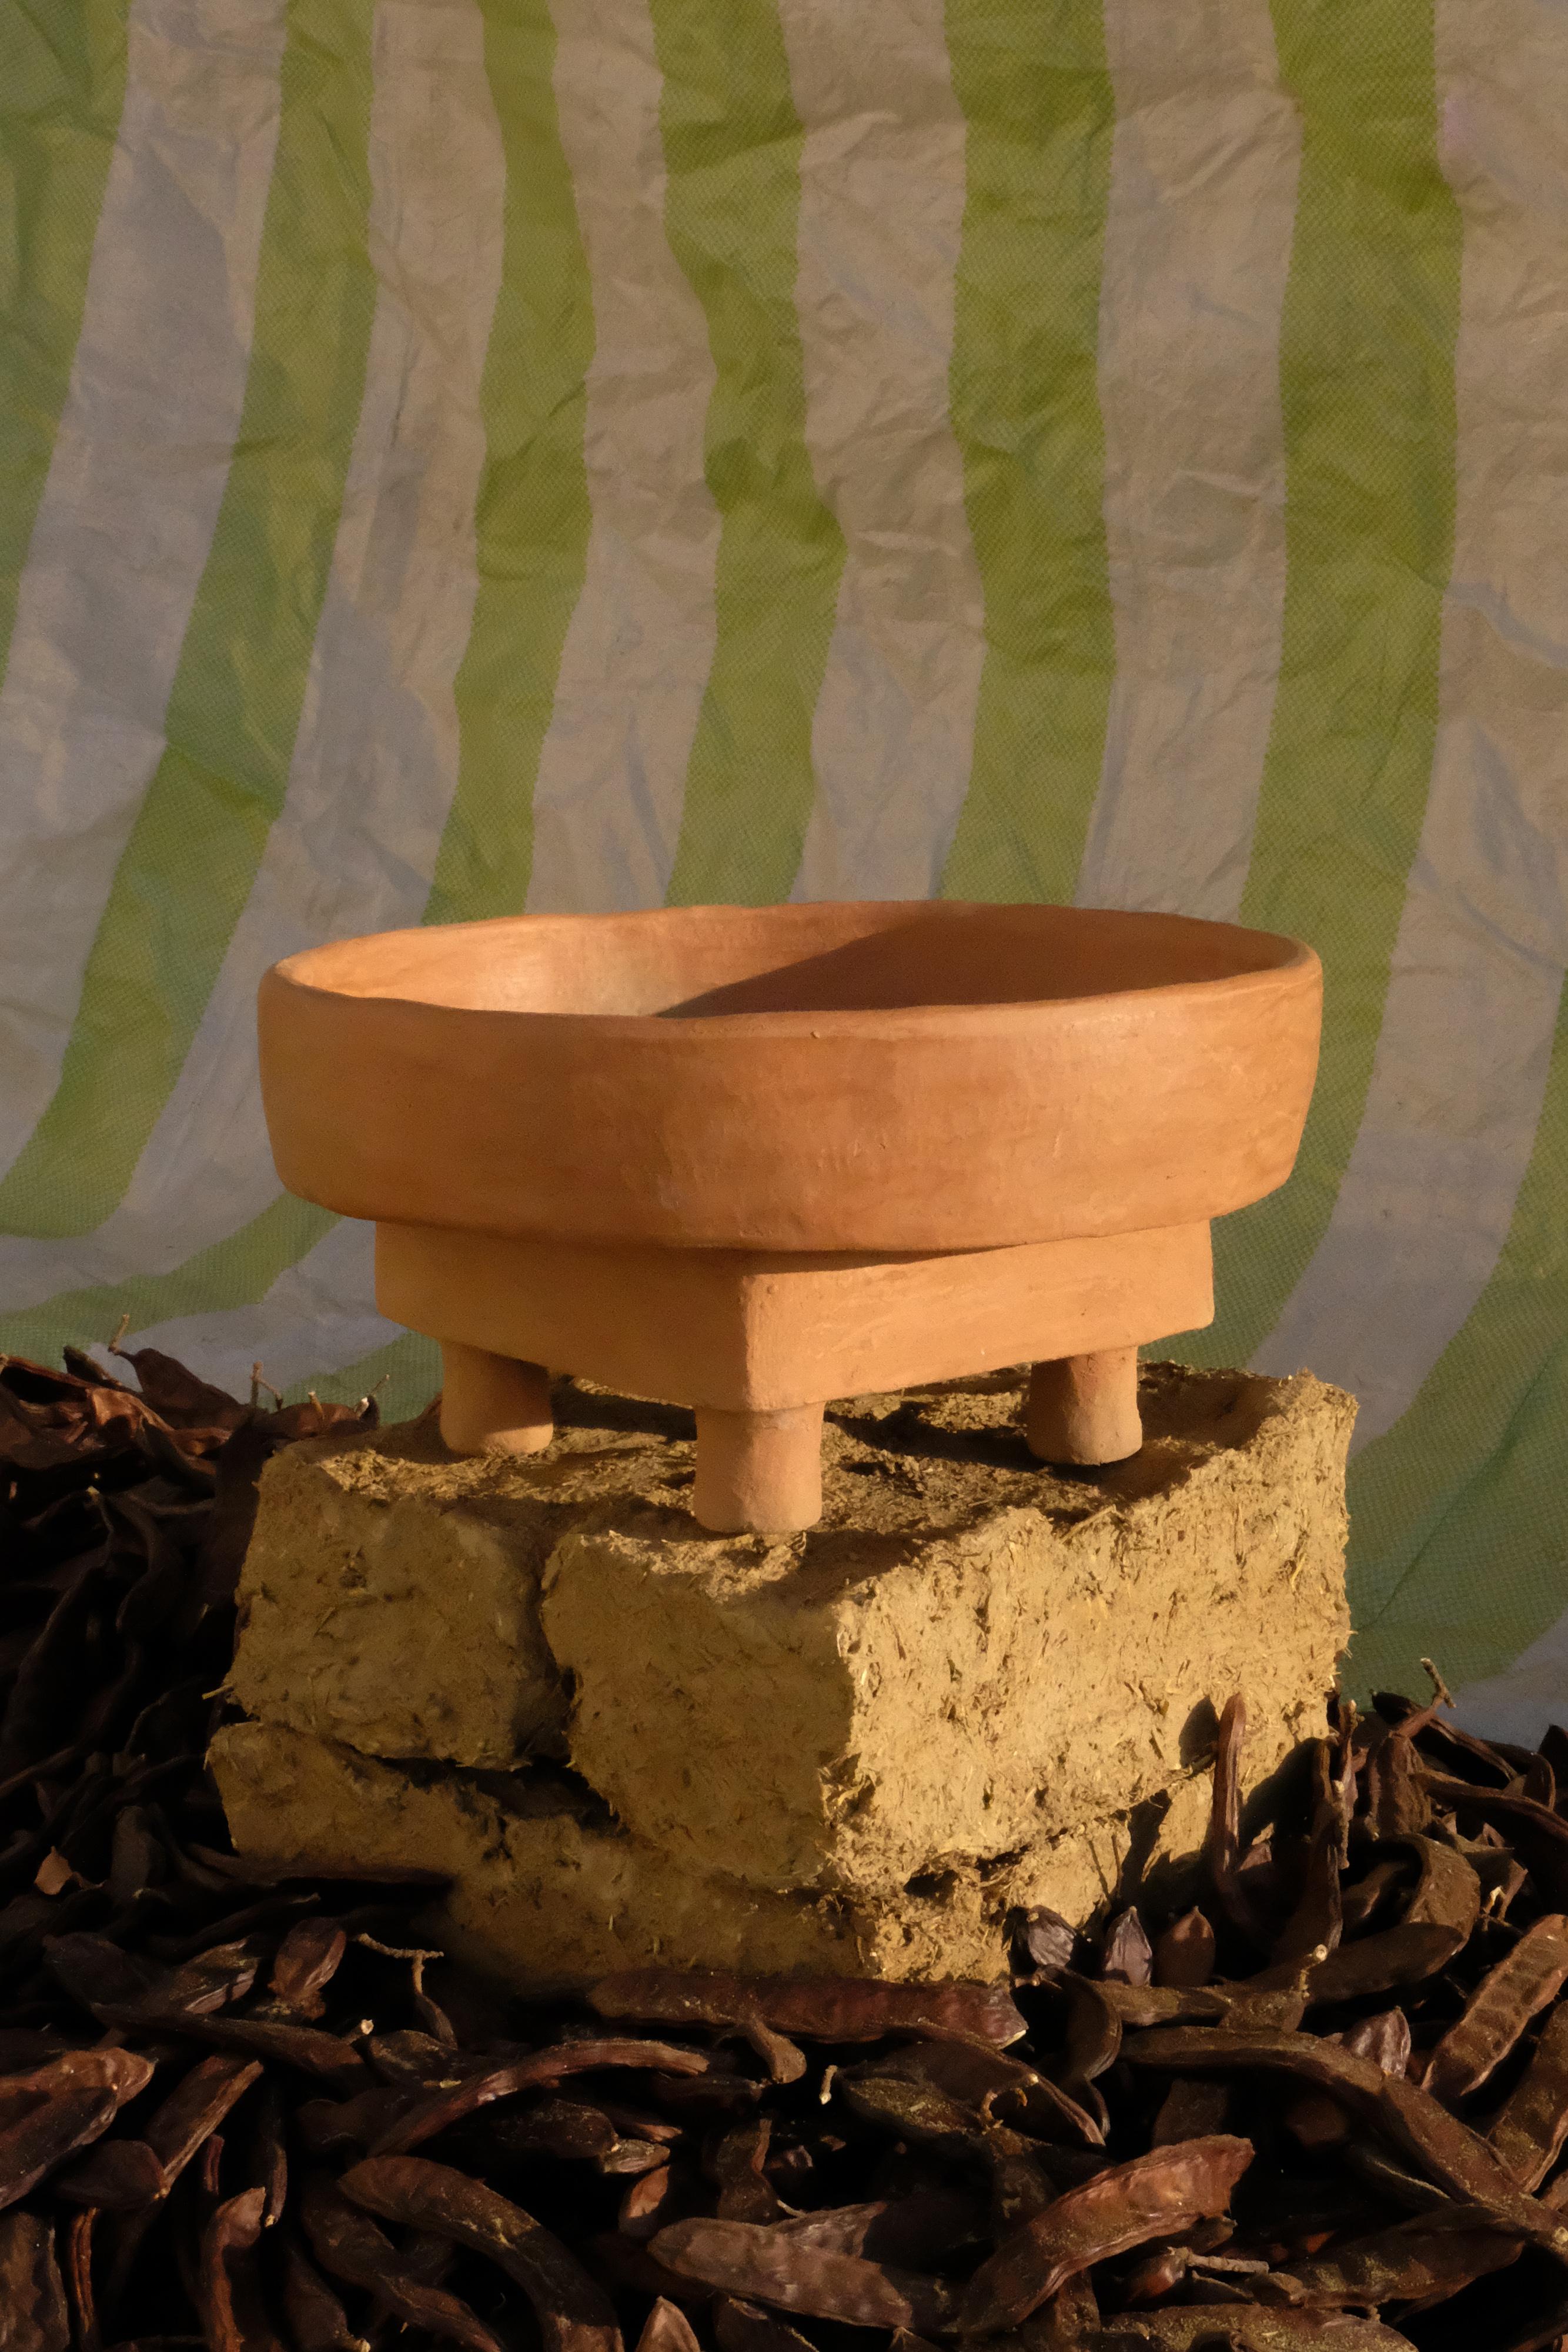 - Handbuilt terracotta side tables
- made of clay collected from the potter's surroundings.
- made in the Moroccan Rif mountains by the potter Houda.
- co-created by the potter Houda x memòri team

Approximate measurements: Ø 11.8 x 7.9 in // Ø 30 x